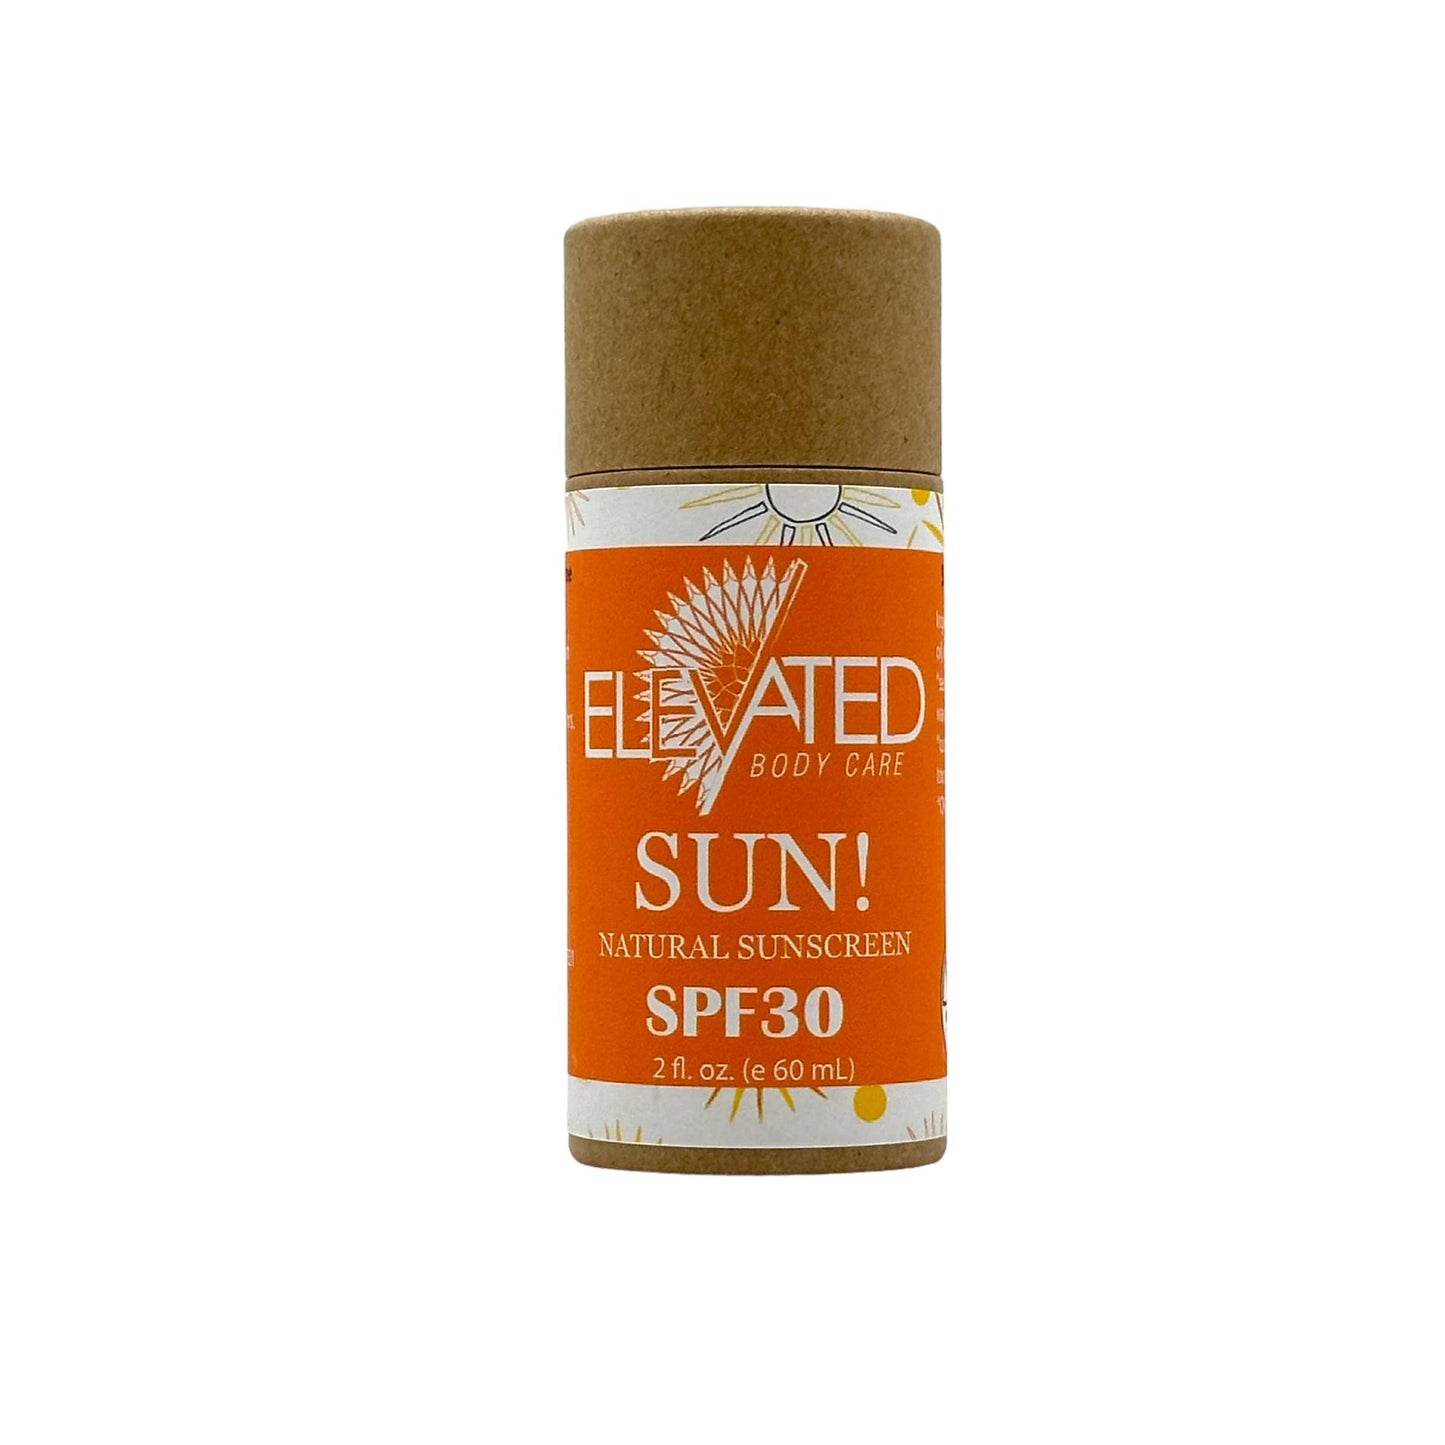 Taylor's Naturals - ELEVATED - SUN STICK Sunscreen